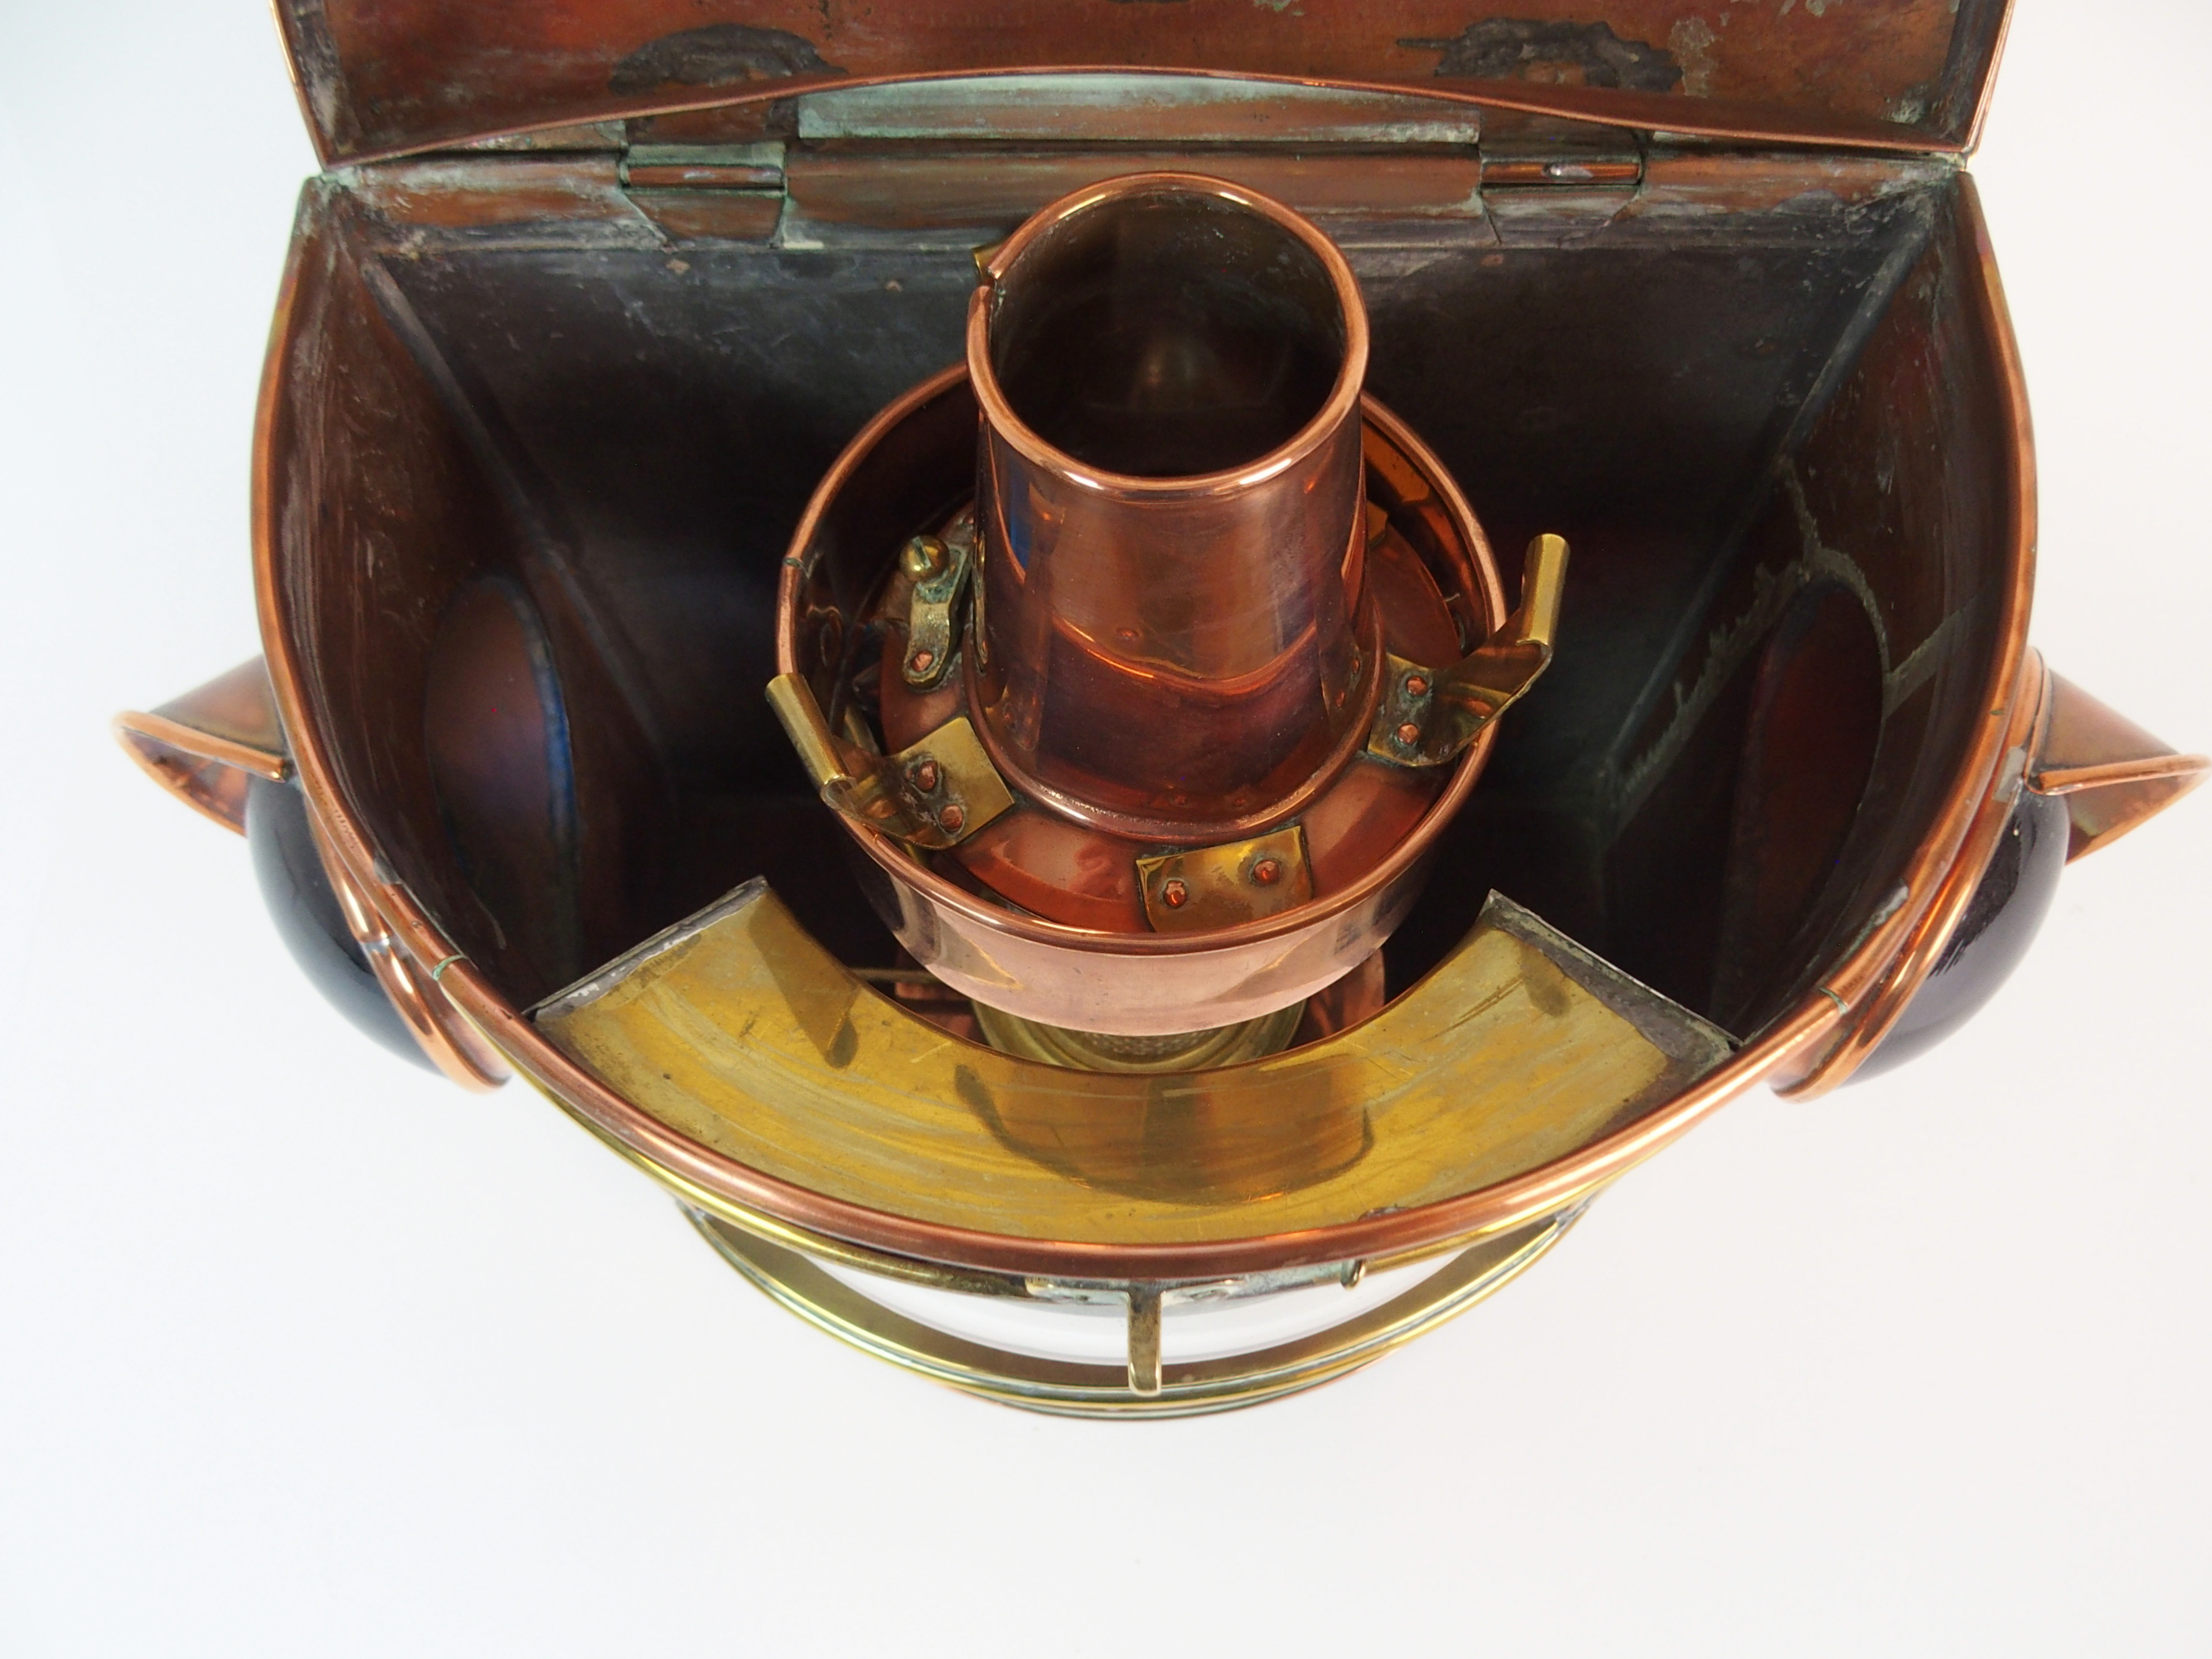 A VICTORIAN COPPER PORT & STARBOARD SHIPS LANTERN with hinged top and swing handle, with interior - Image 7 of 10